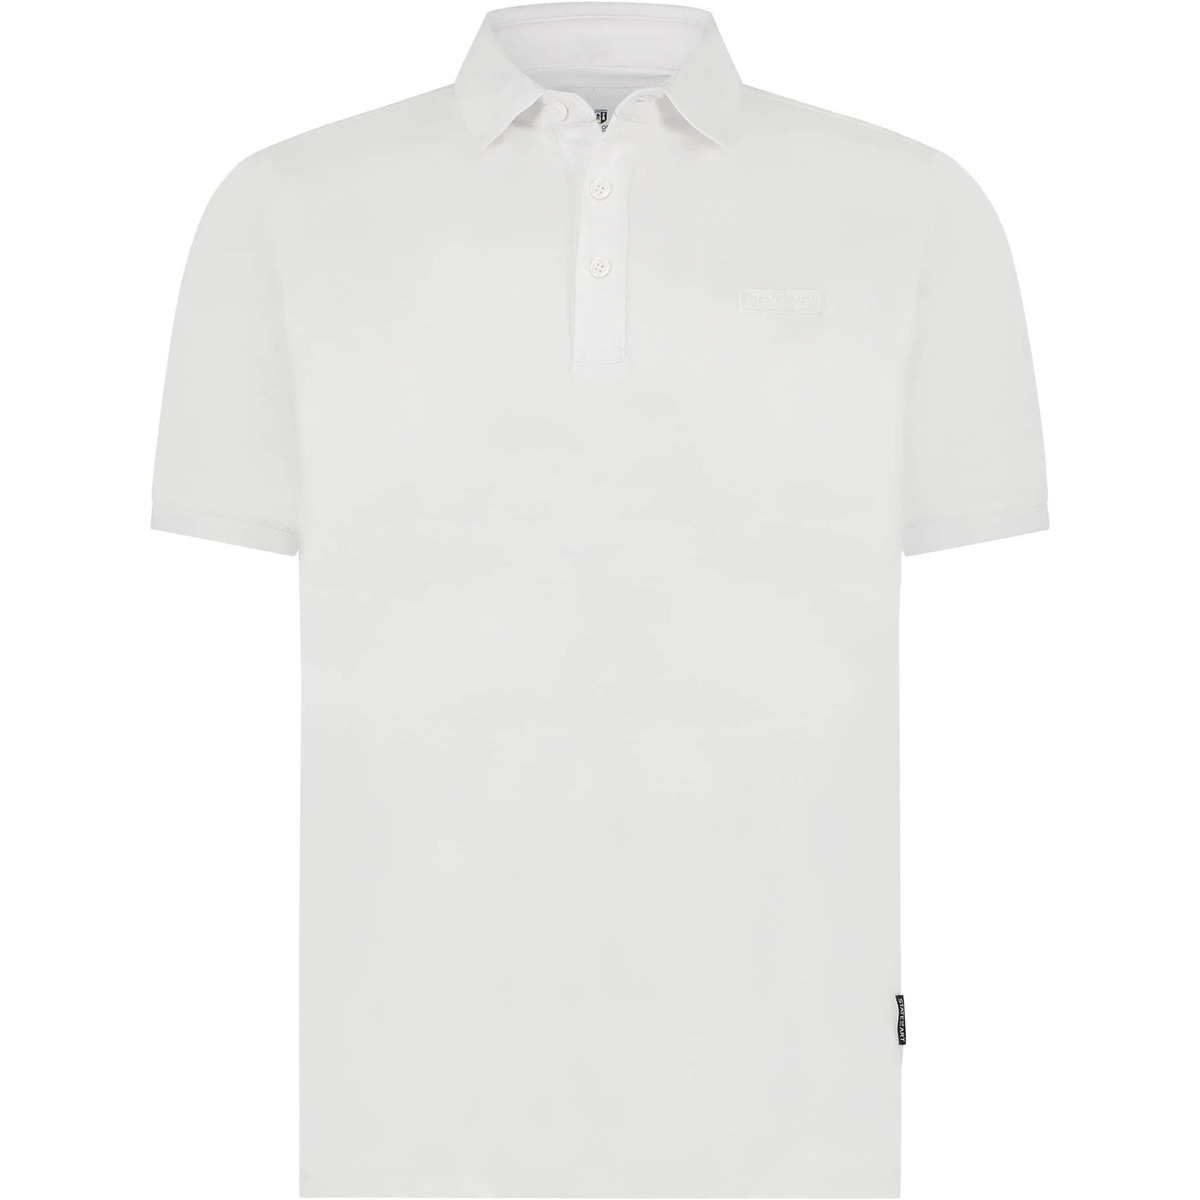 Textiel Heren T-shirts & Polo’s State Of Art Piqué Polo Wit Wit